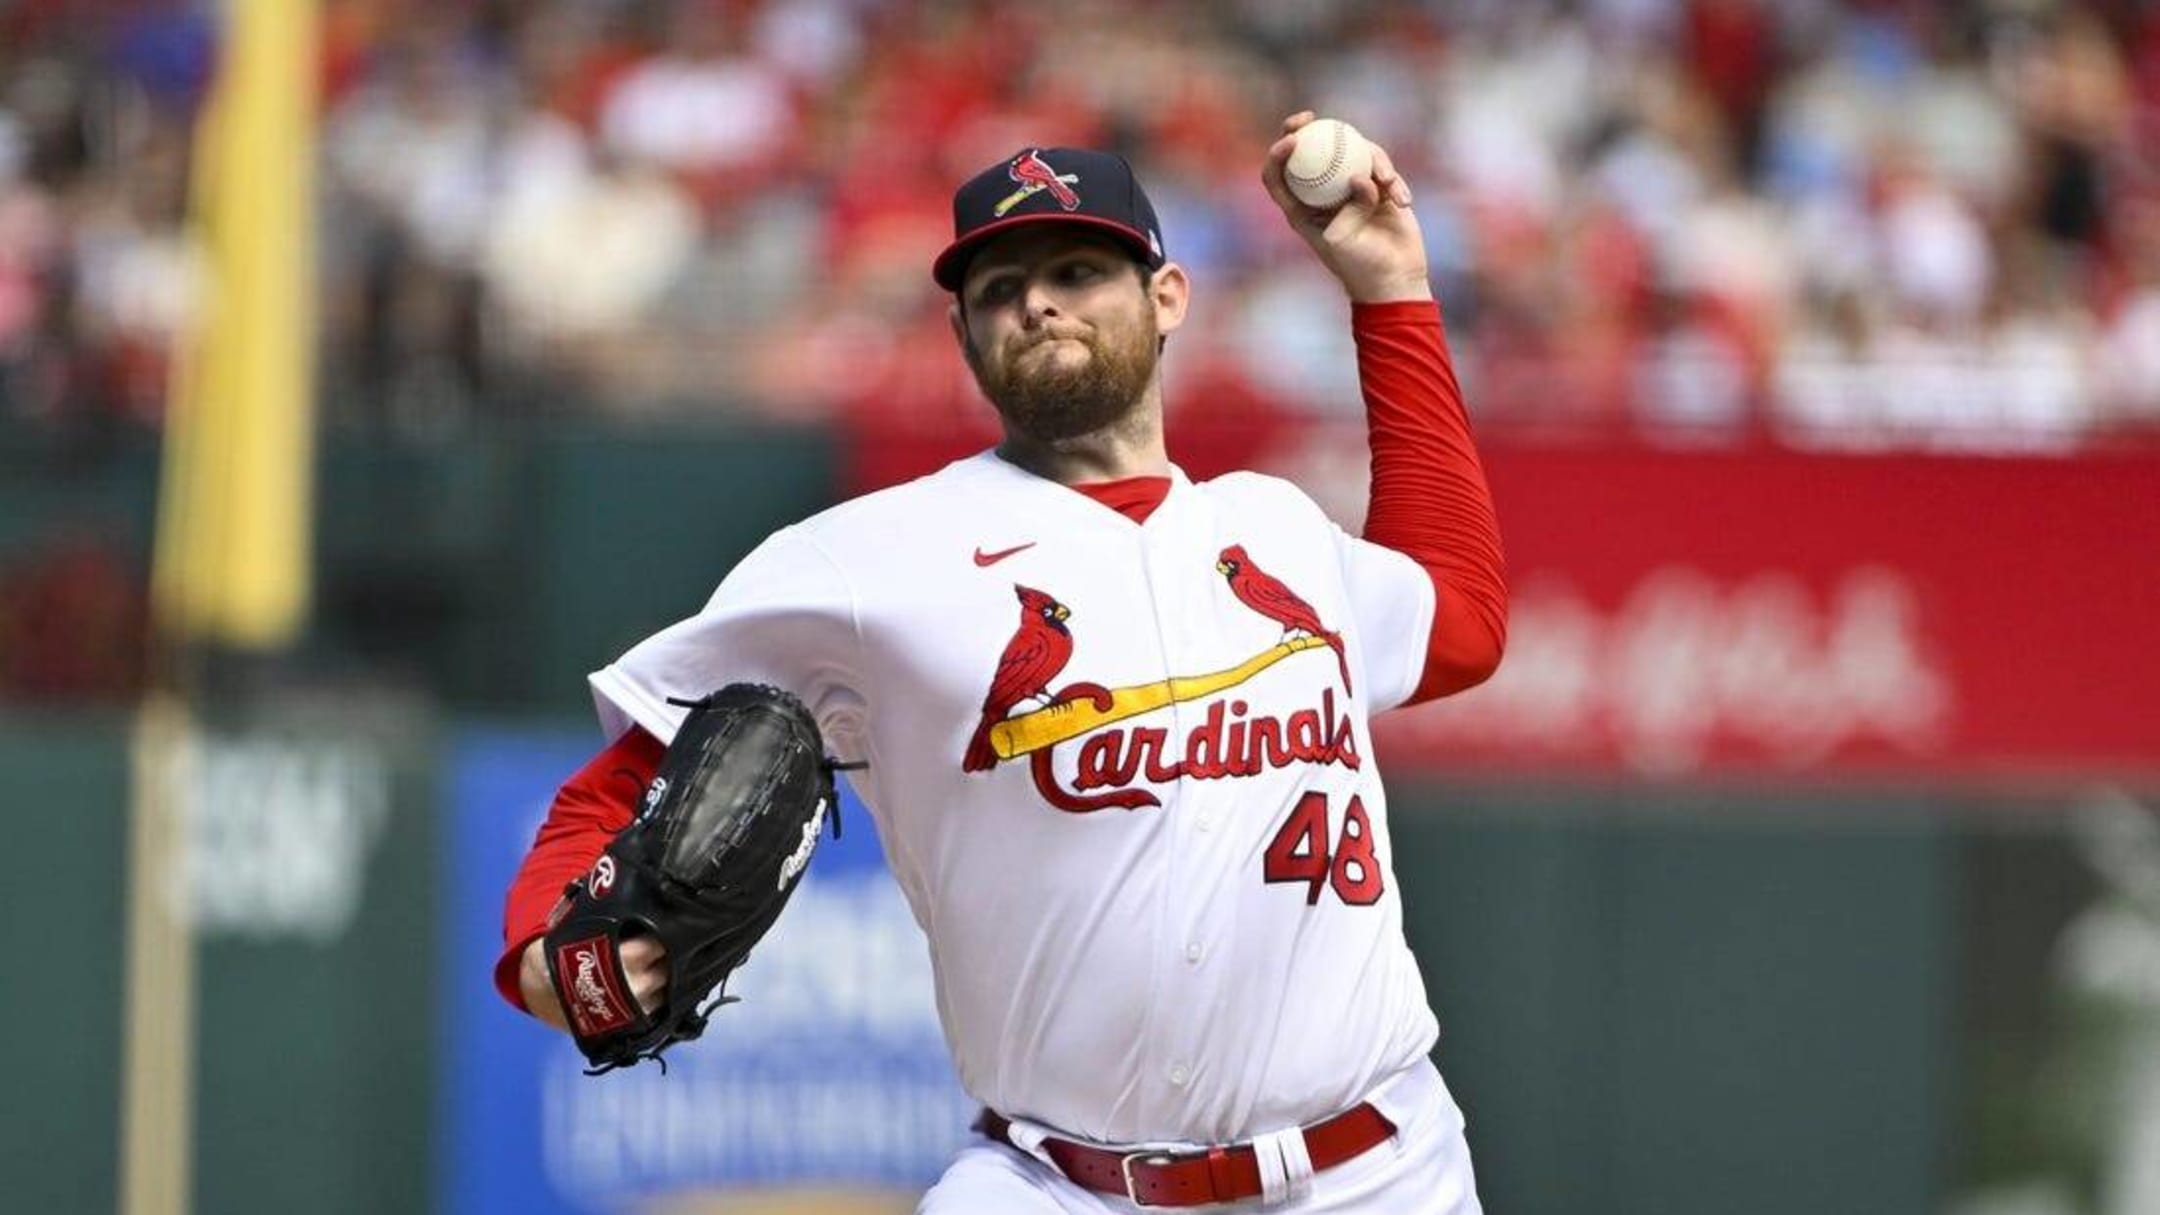 Jordan Montgomery pitches St. Louis Cardinals to 4-2 victory over